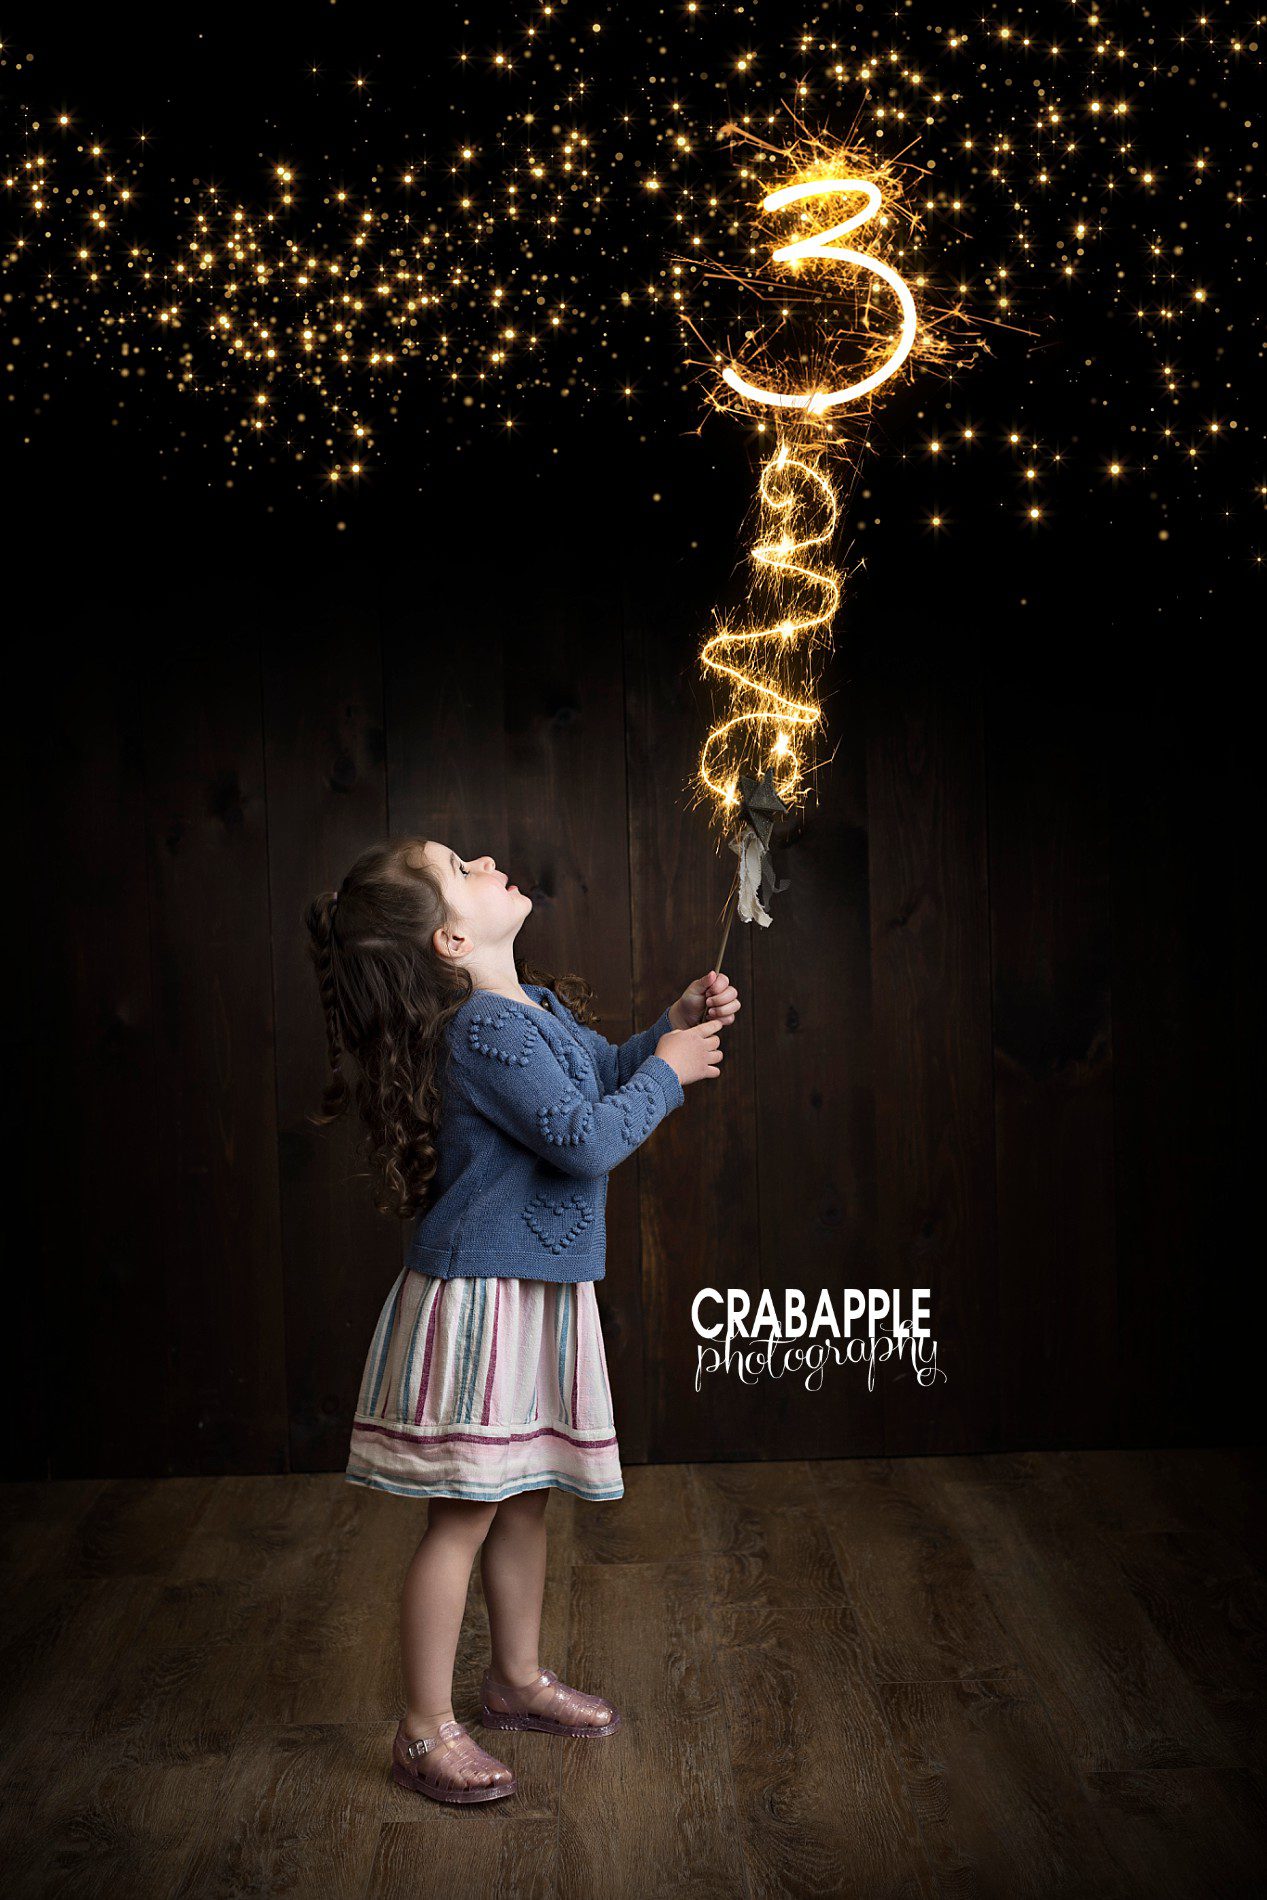 using digital editing to add magic and whimsy to child portrait photography.